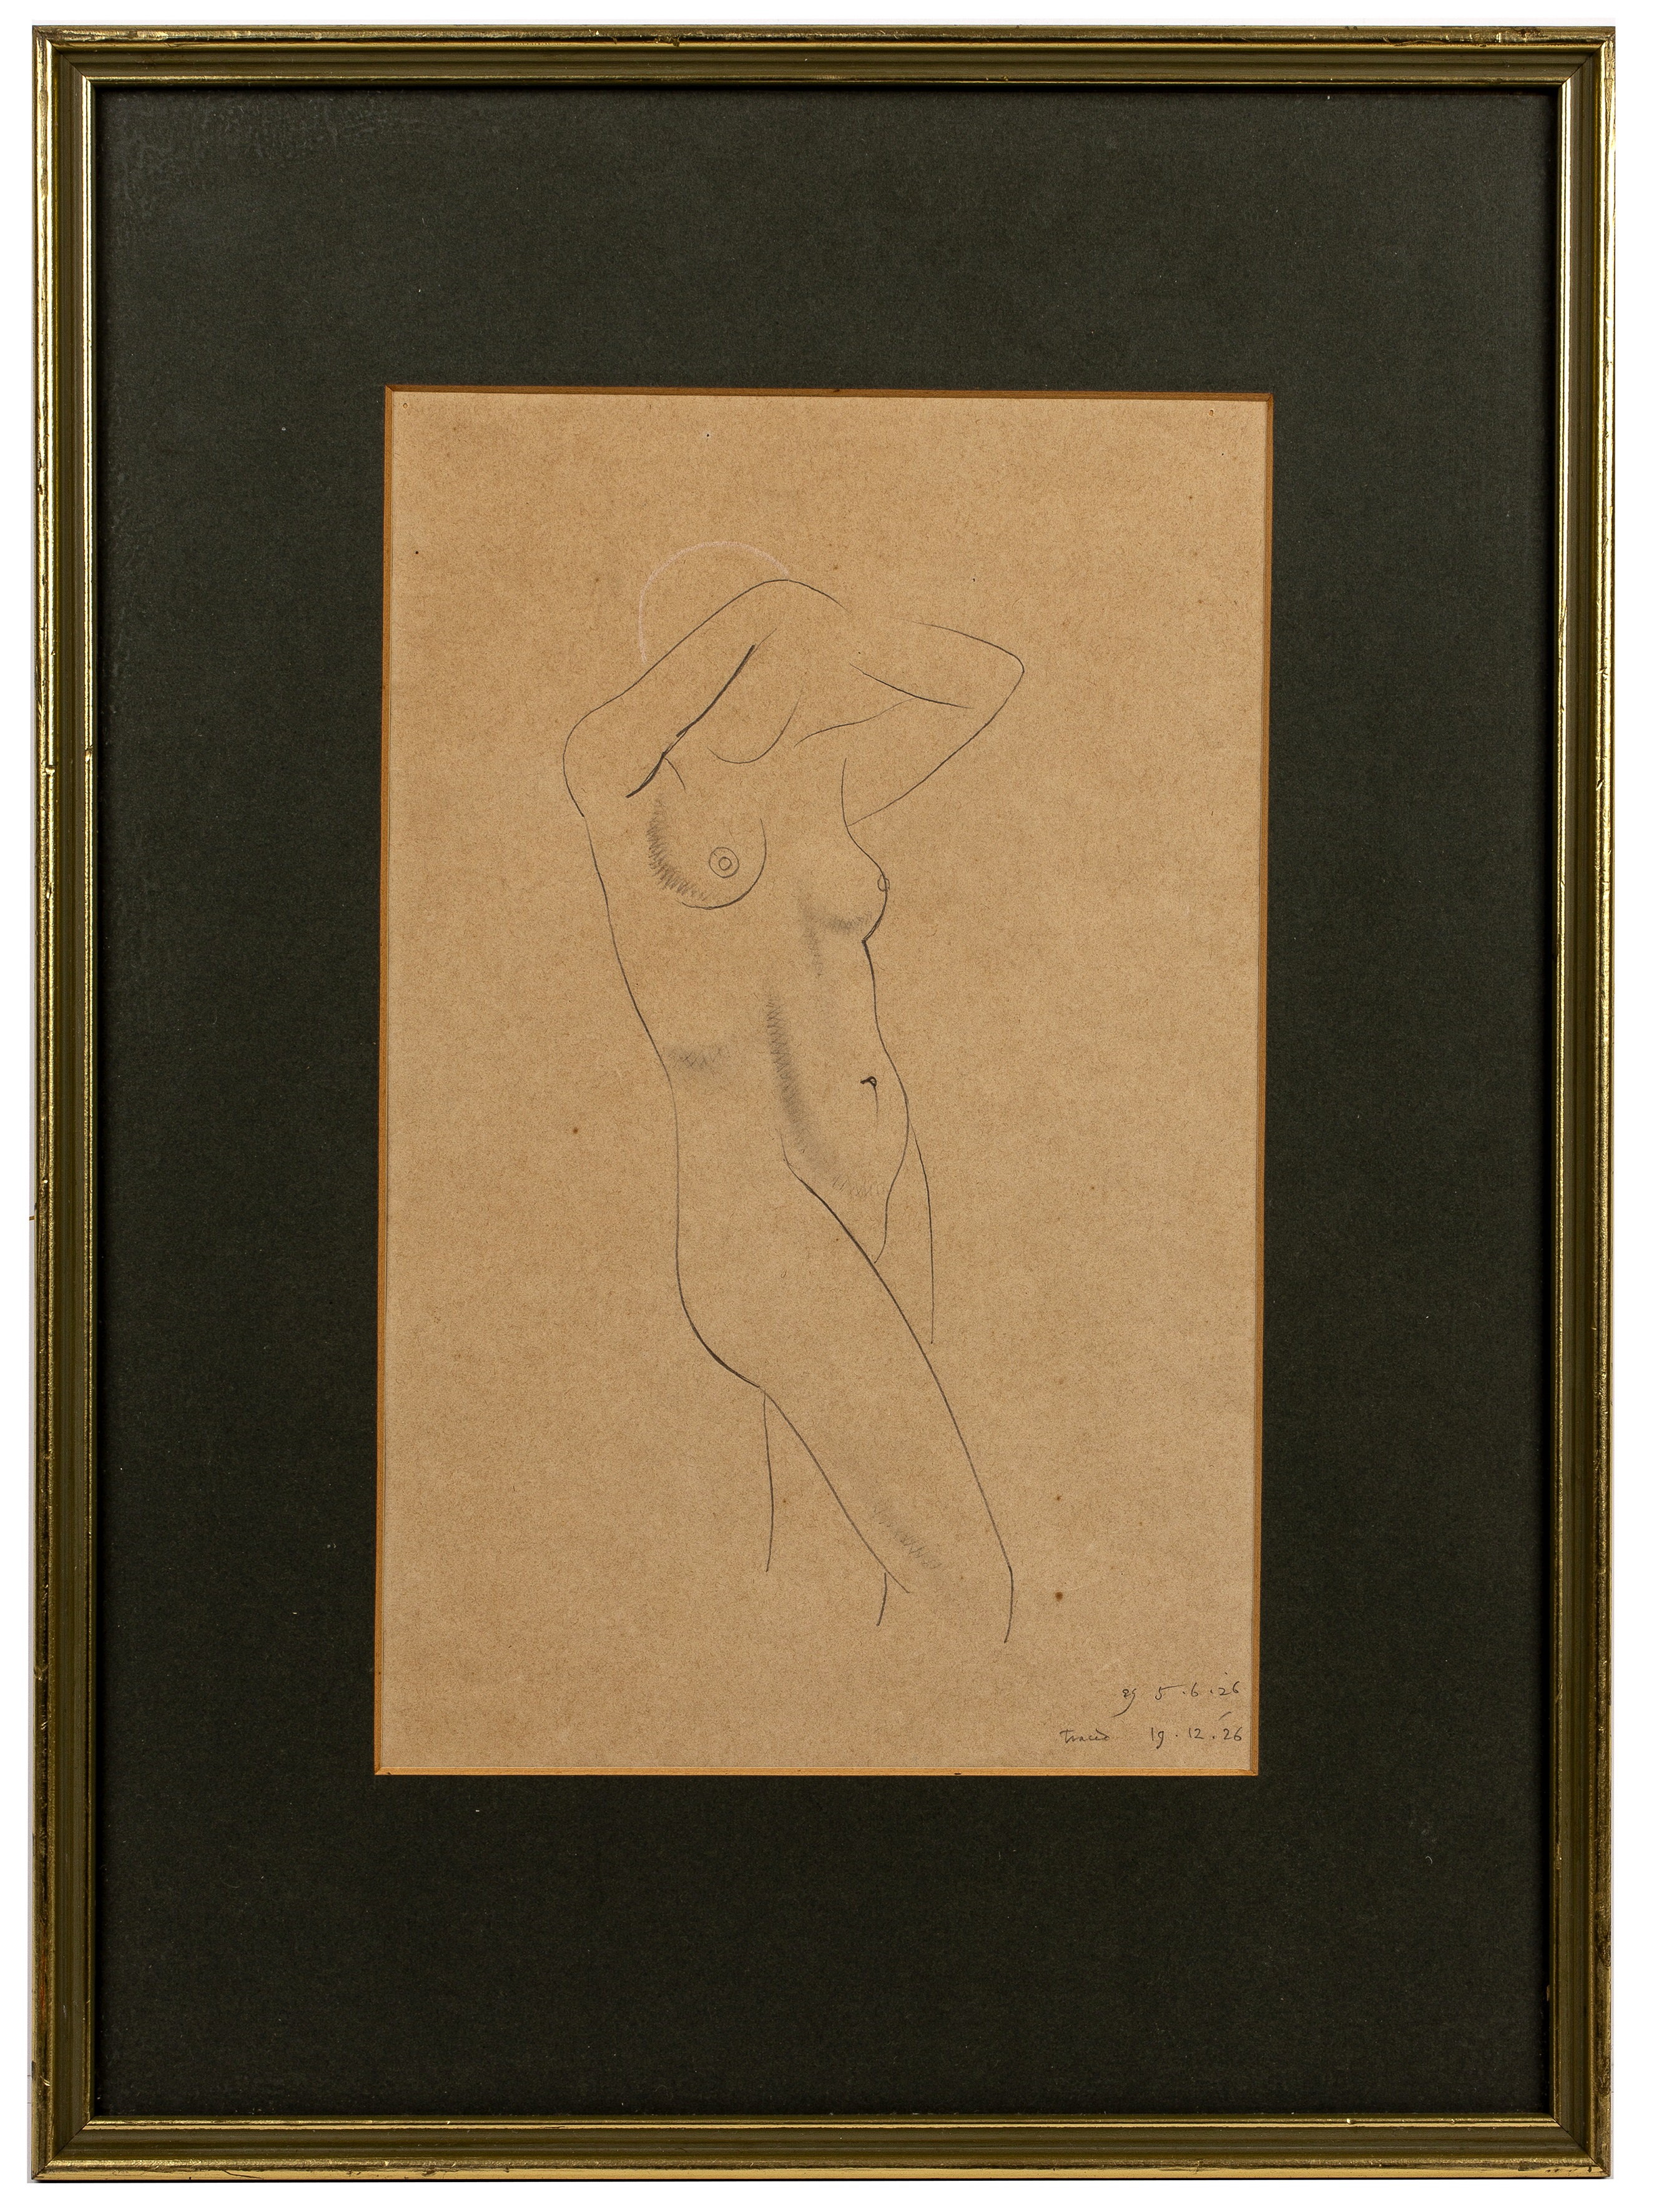 Eric Gill (1882-1940) Nude with Arms Raised, 1926 signed with initials and dated (lower right) - Image 2 of 3